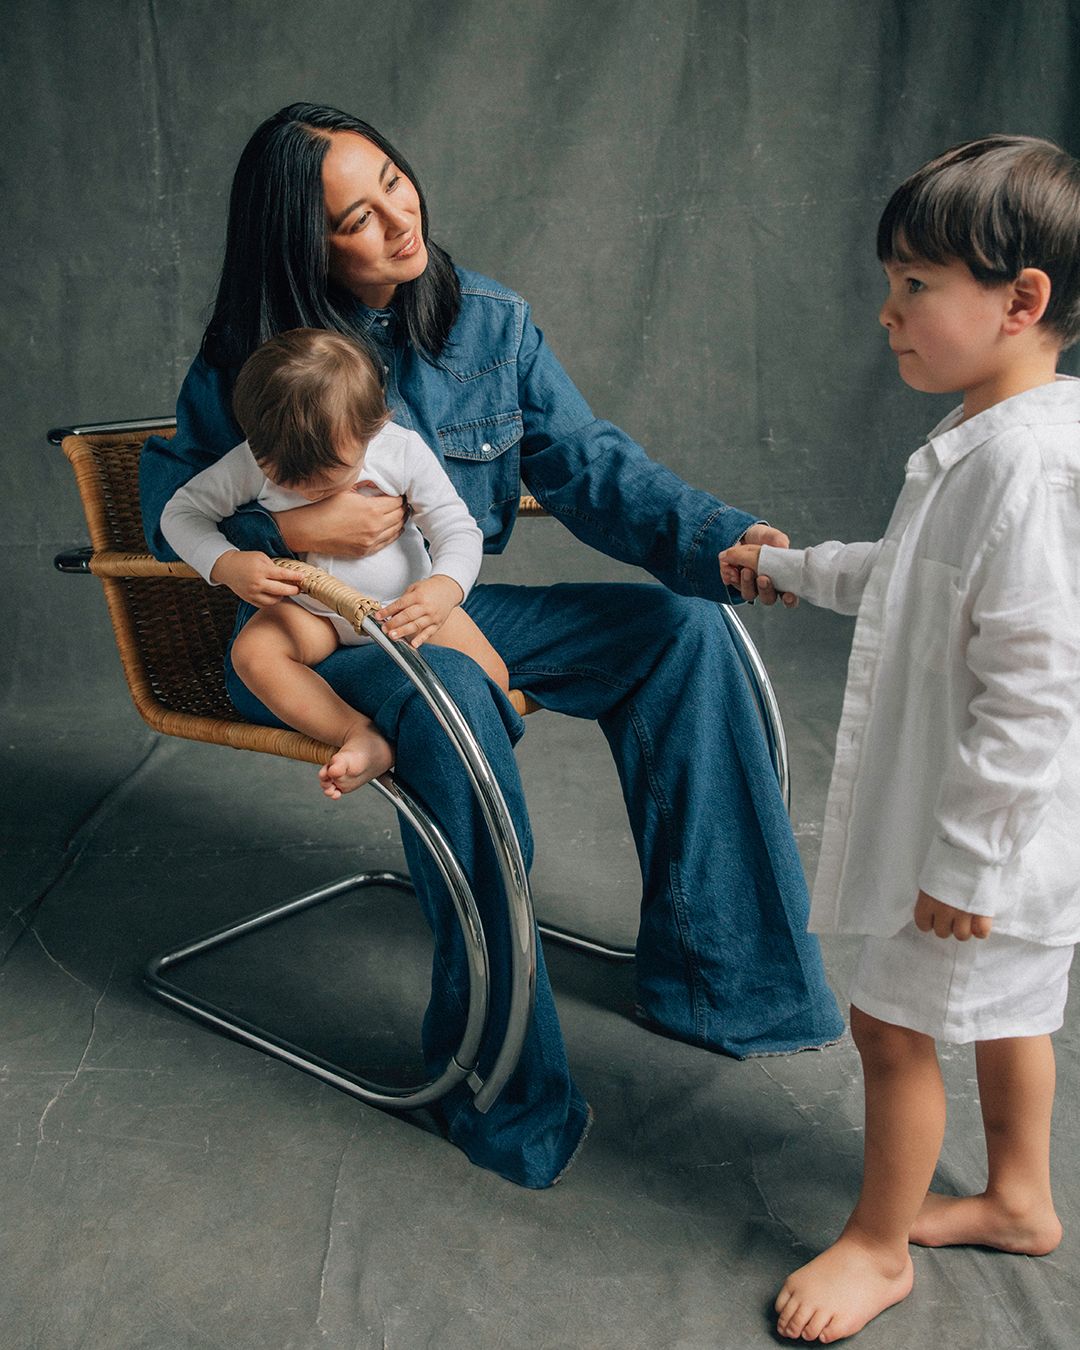 Petta Chua in double denim sitting down holding her baby while holding her toddler's hand